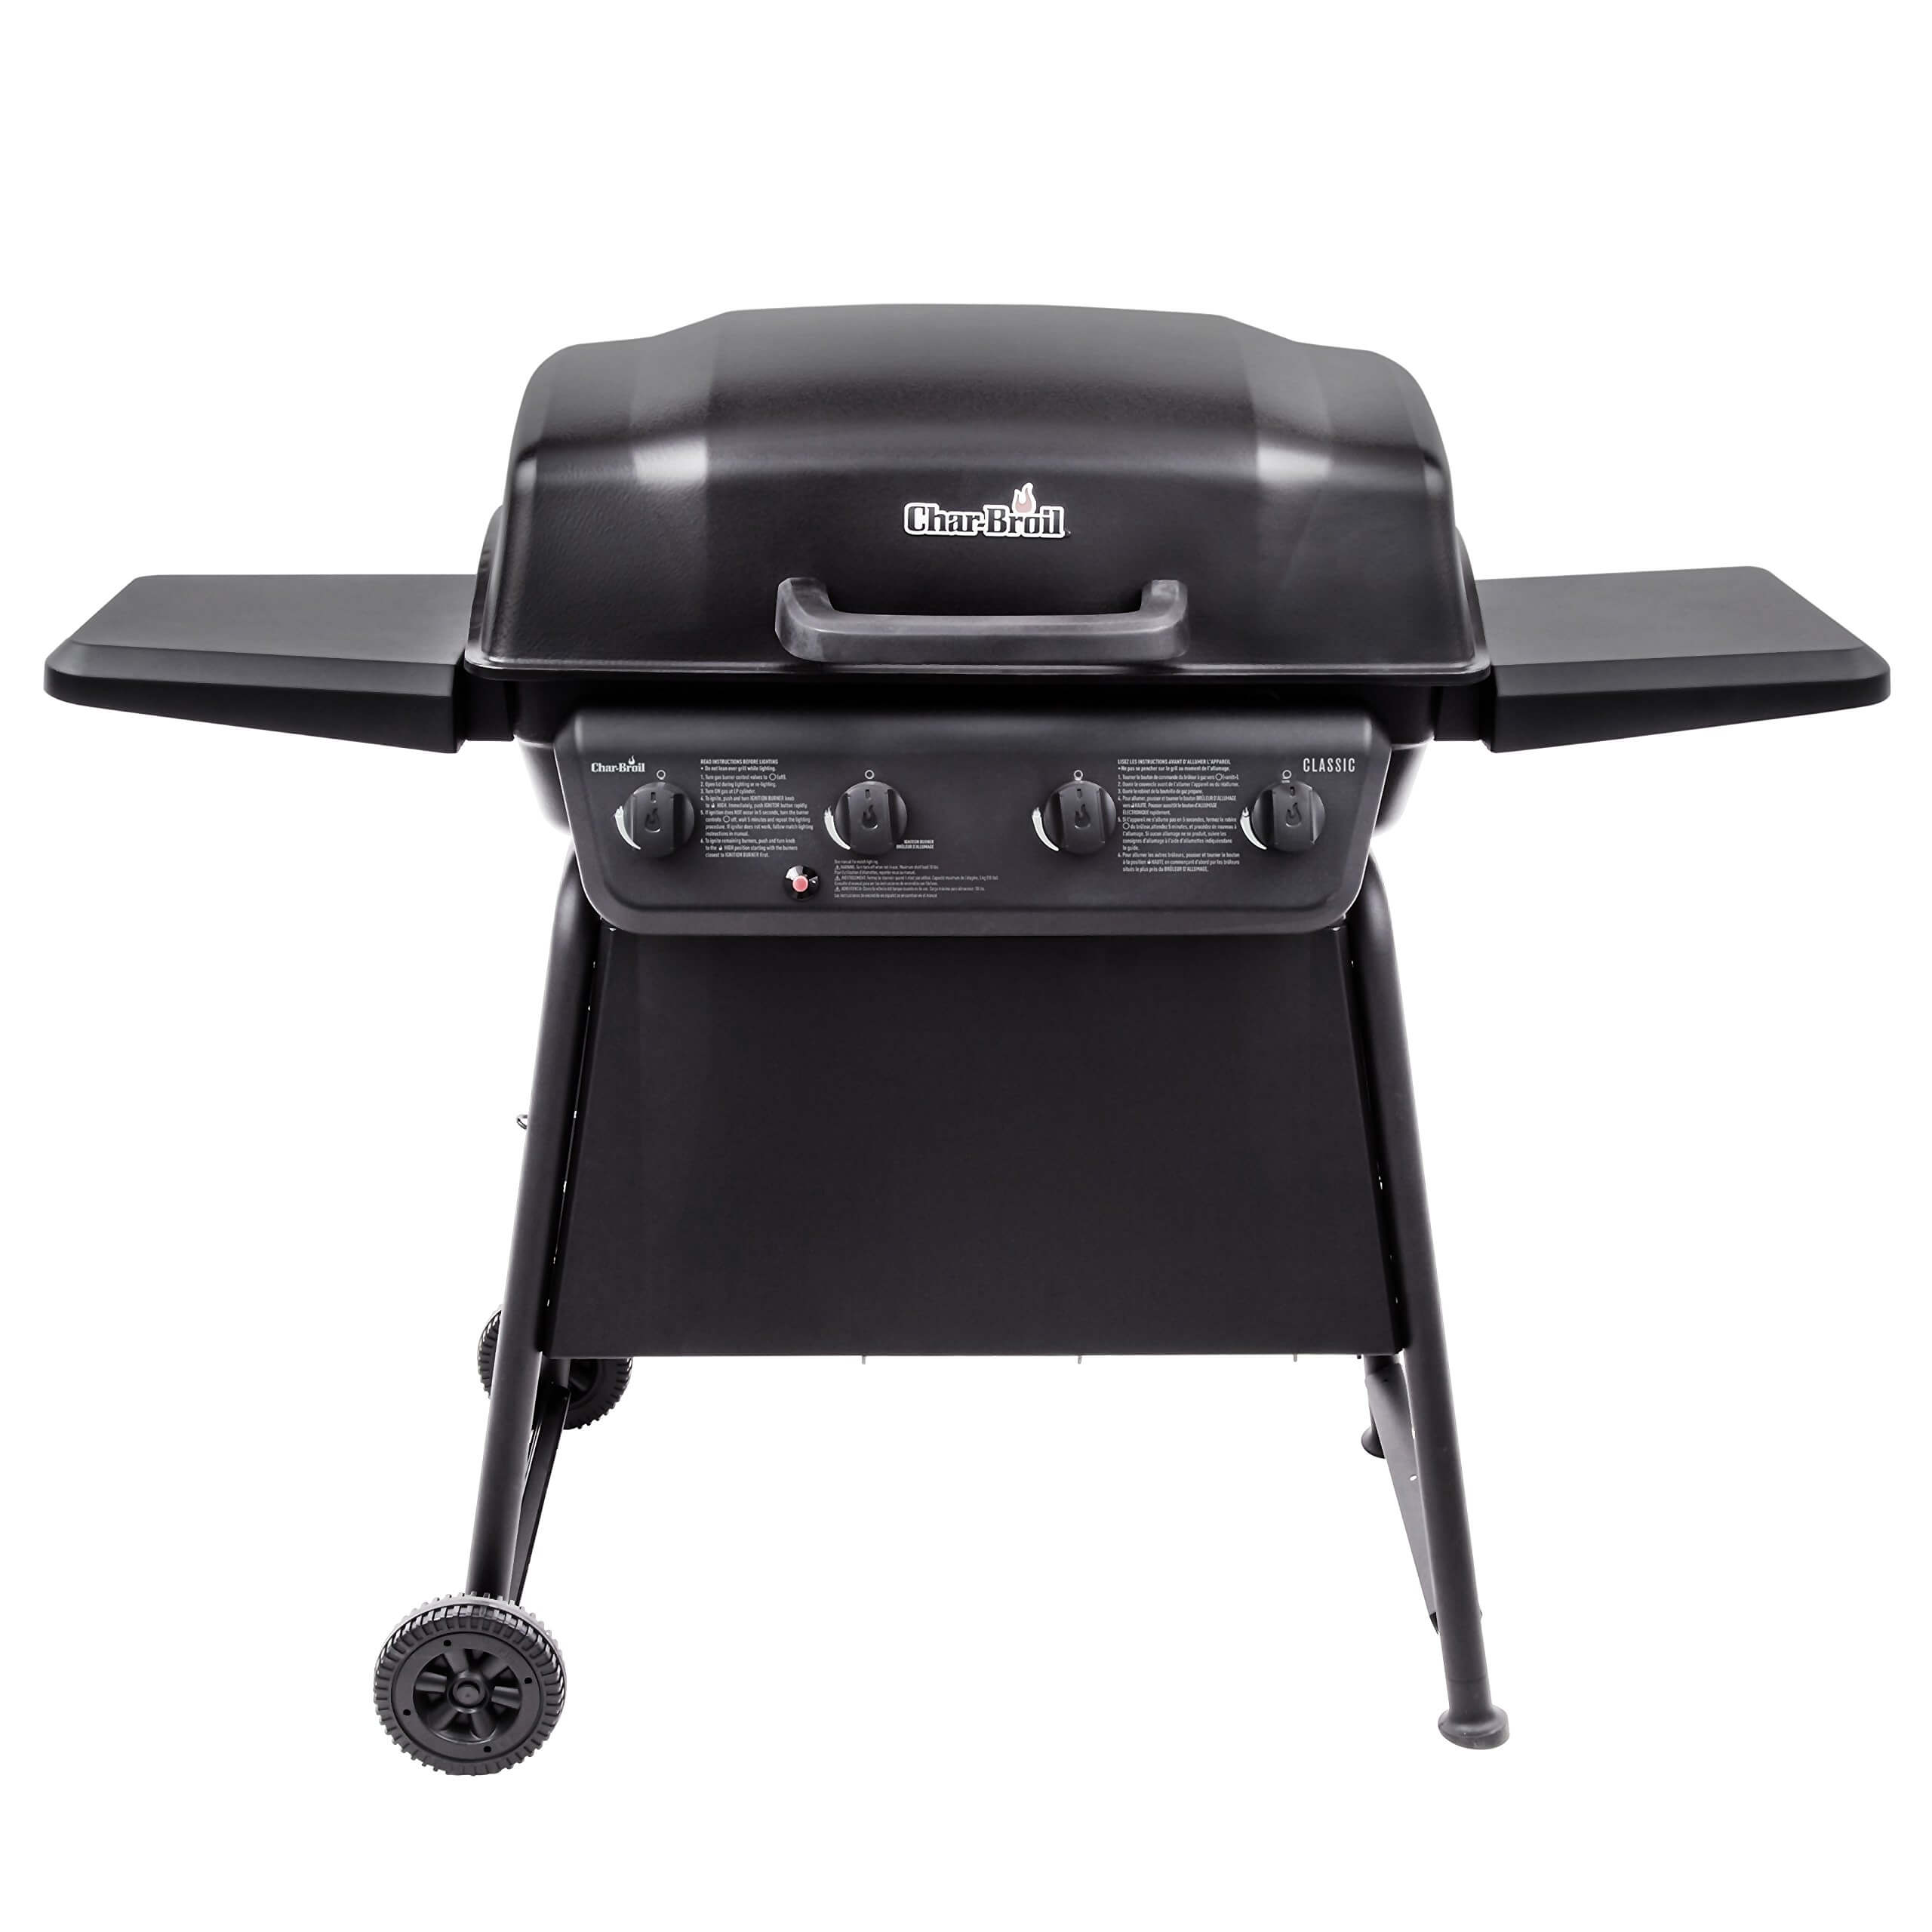 Char-Broil Classic 405 4 – Burner Liquid propane Grill, best propane grills 2020, best bbq grills 2020, grill reviews 2020, best gas grill for the money, char-broil performance 475 gas grill, best gas grills under $300